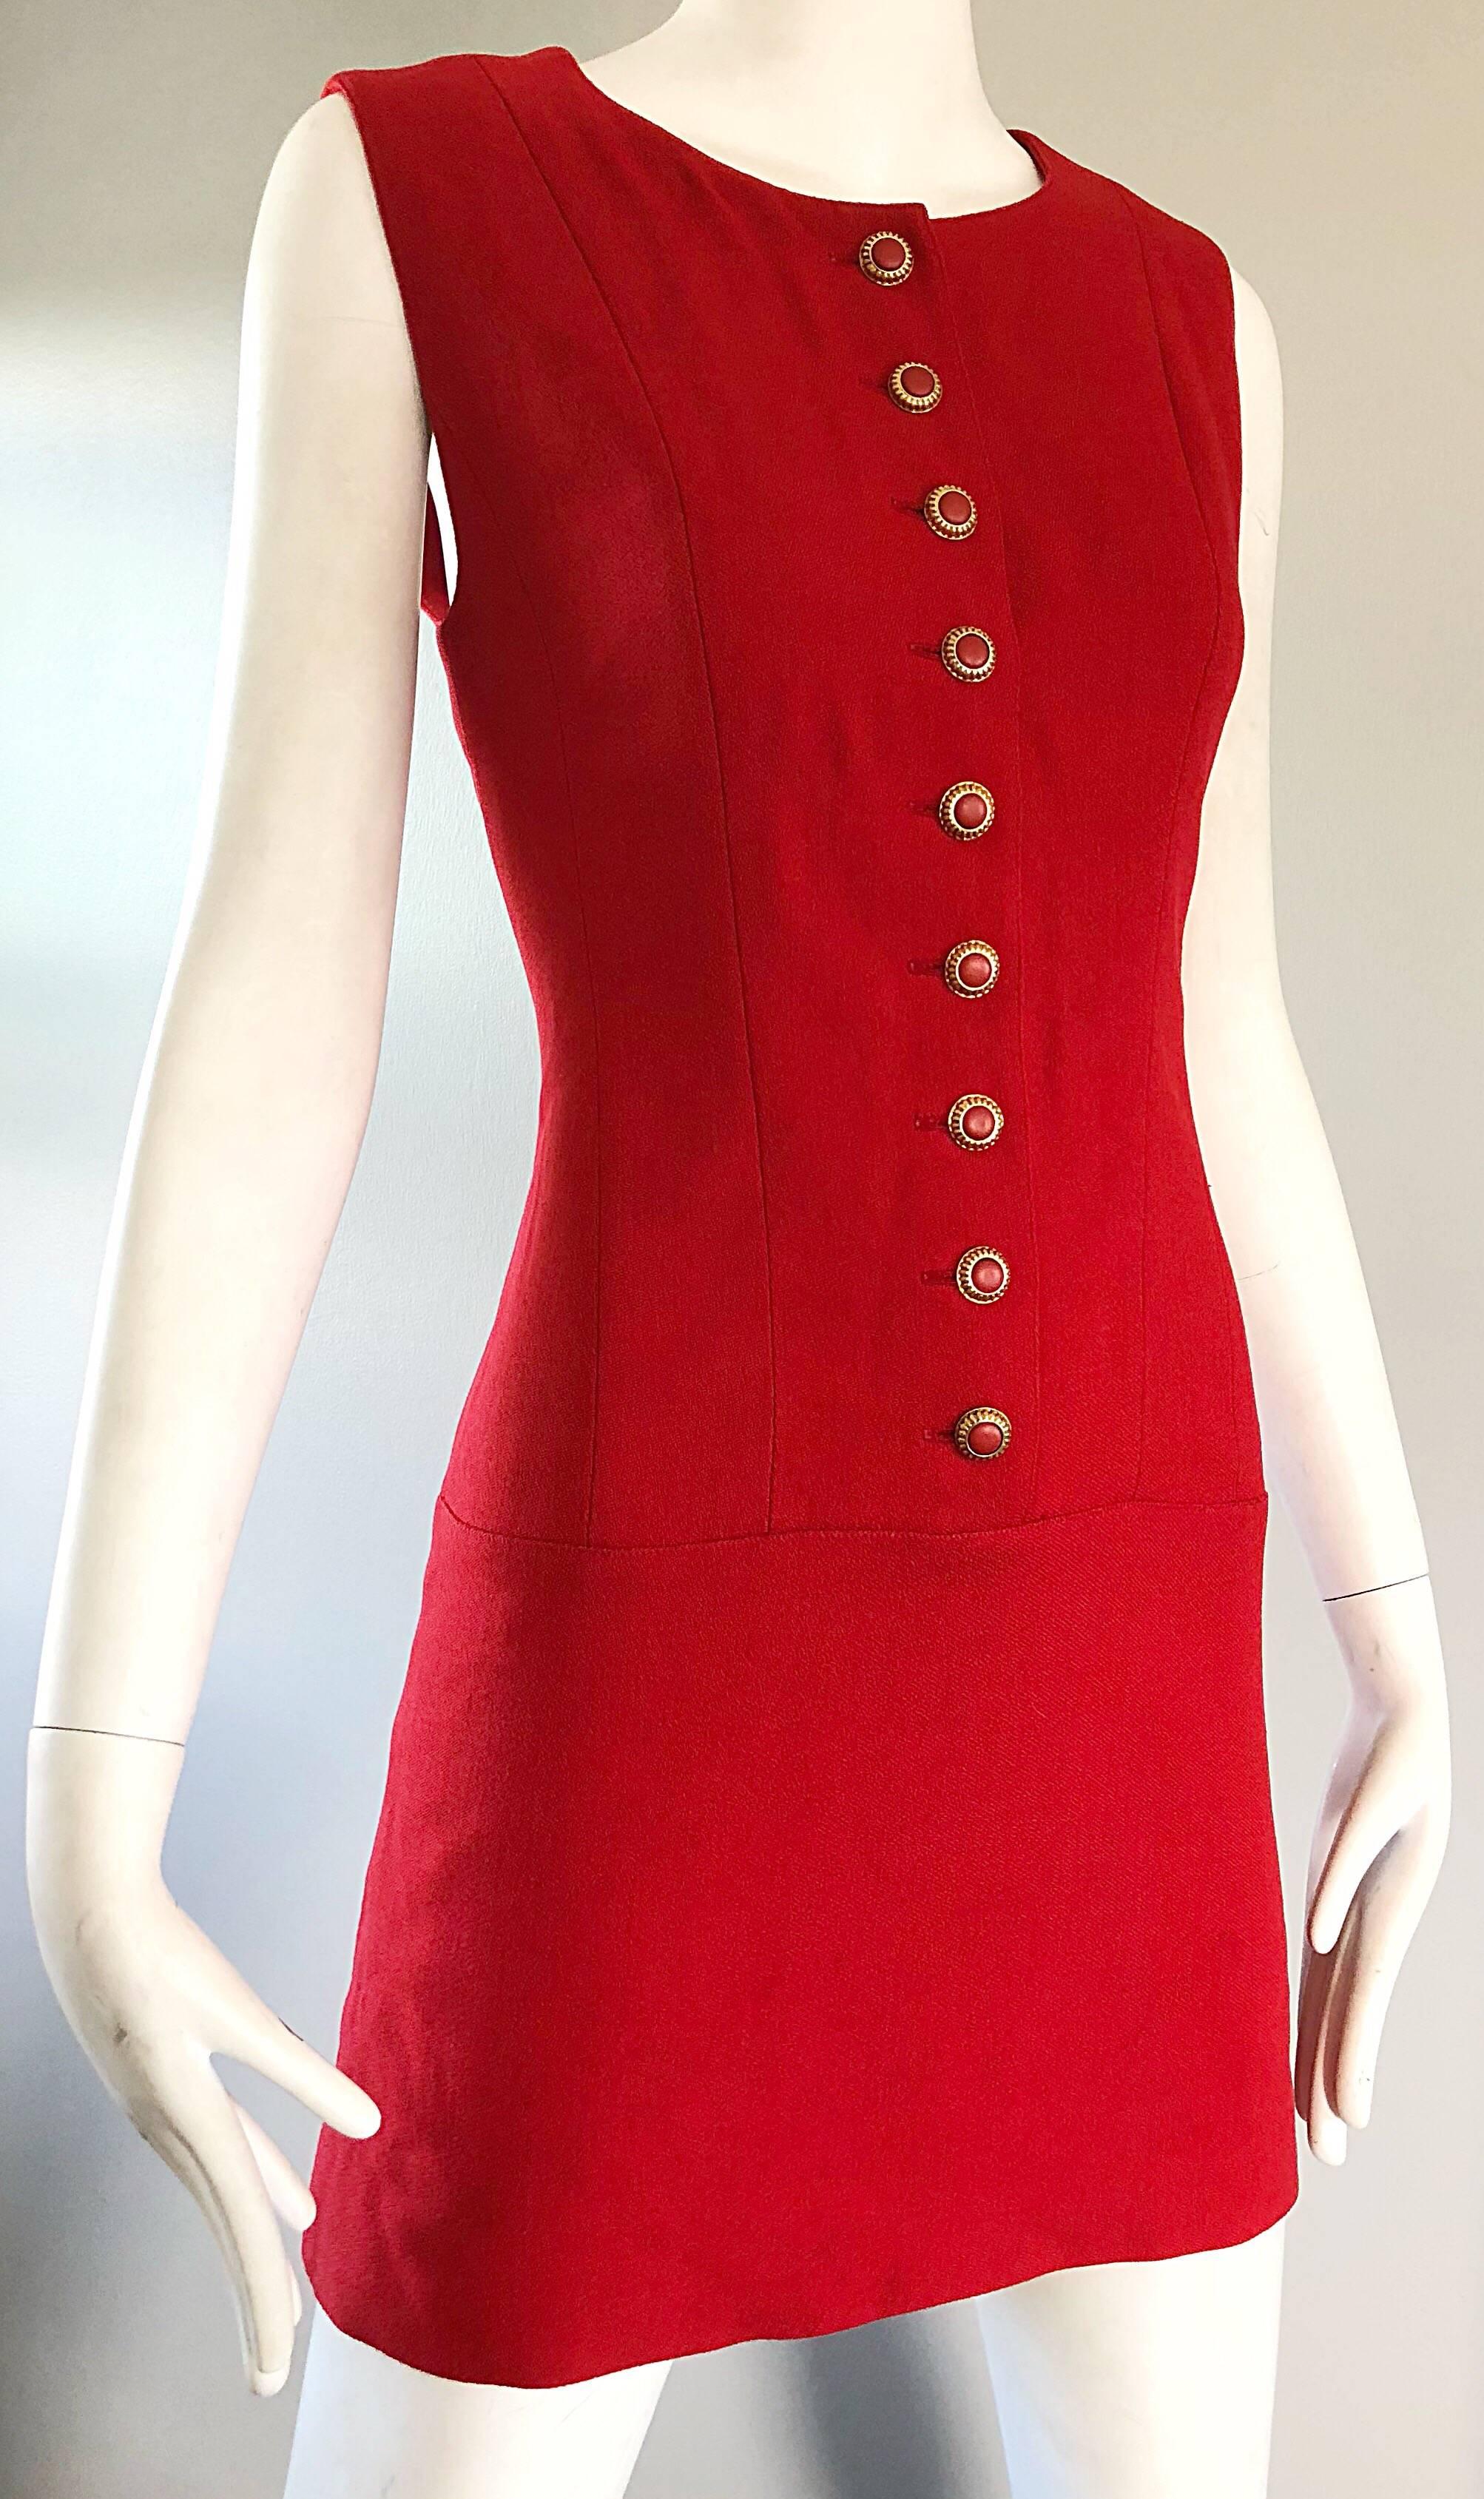 Karl Lagerfeld Chic Vintage  1990s Does 1960s Lipstick Red Wool Mini Shift Dress 2